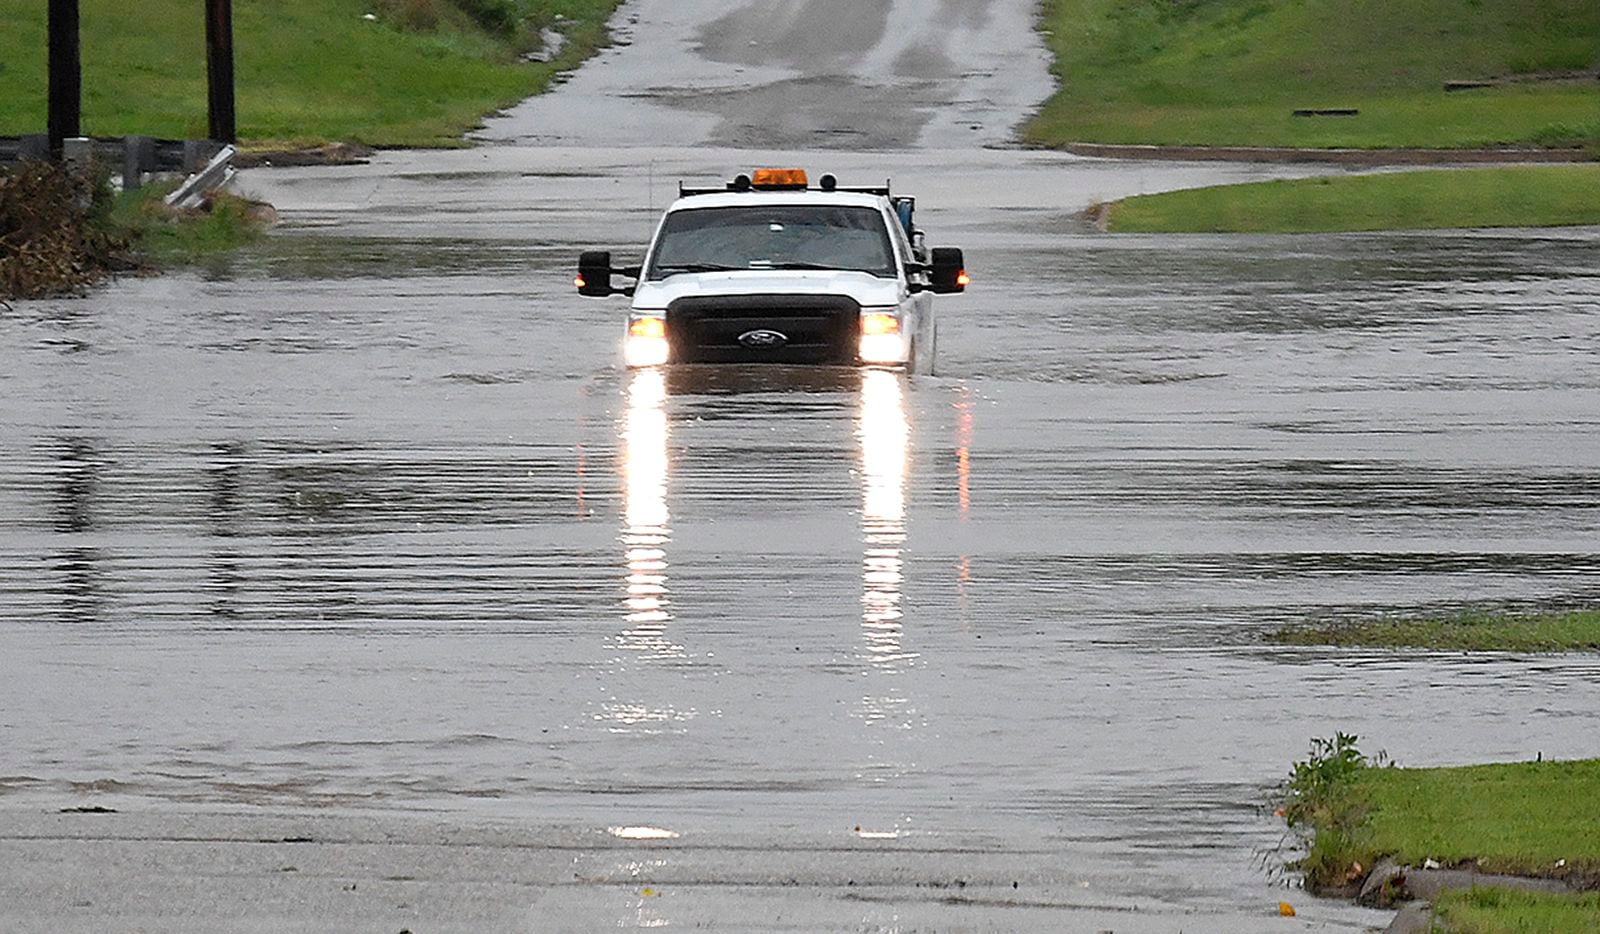 A pickup drives on a flooded street in Enid, Okla., on Monday, May 20, 2019. An intense...